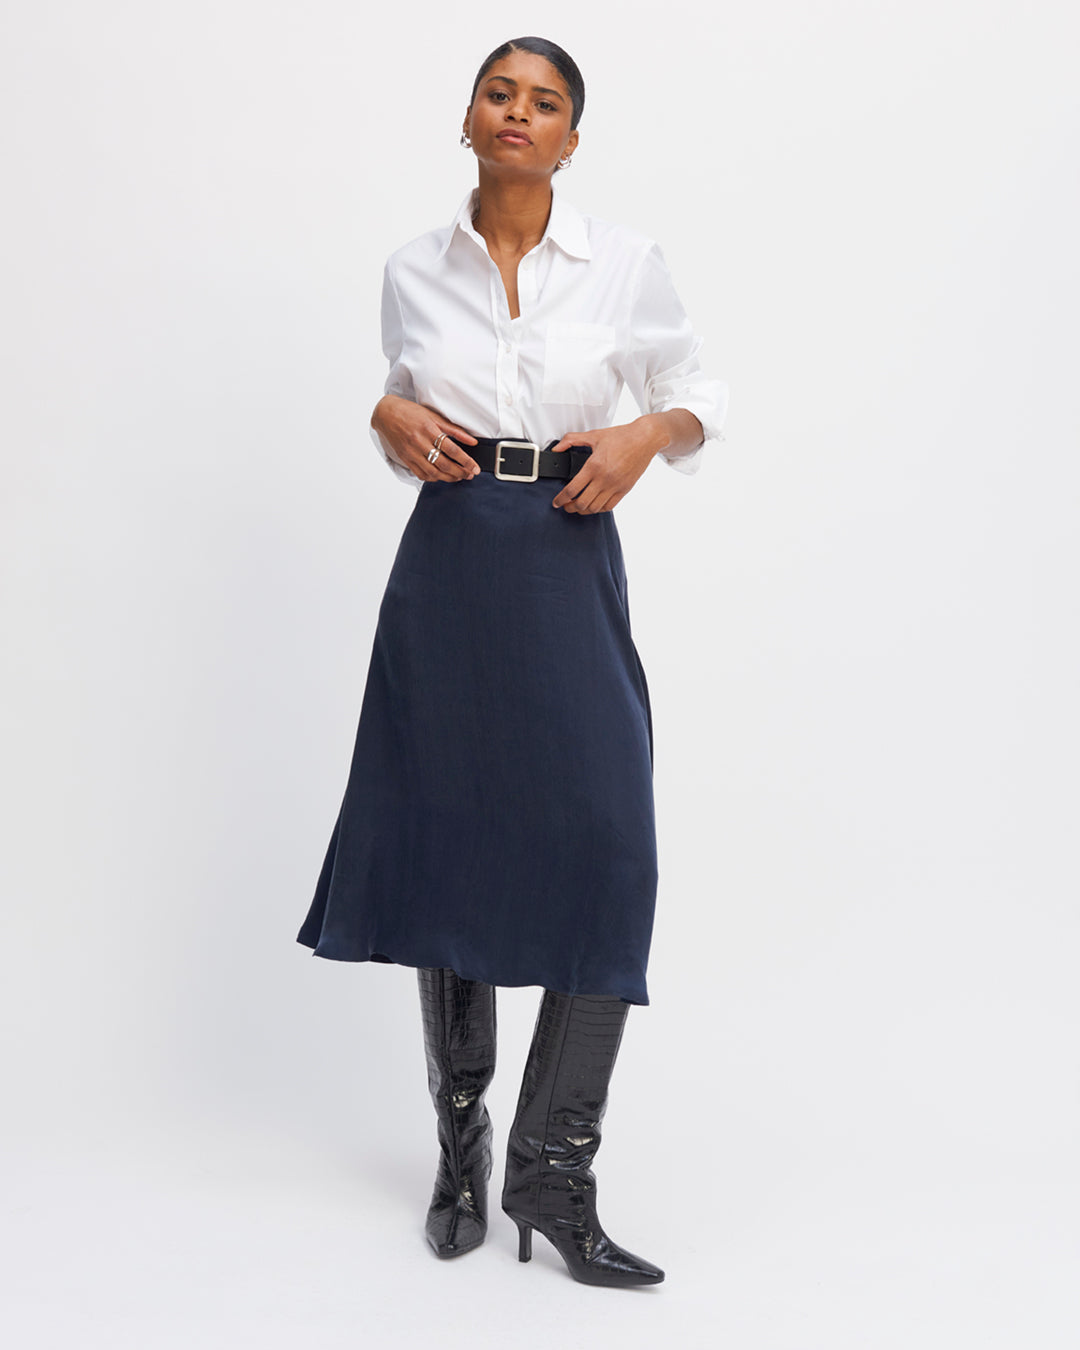 Long-skirt-Midday-cut-Bottom-skirt-flared-Closing-with-invisible-zip-on-the-side-Length-76-cm-for-one-36-17H10-tailors-for-women-paris-